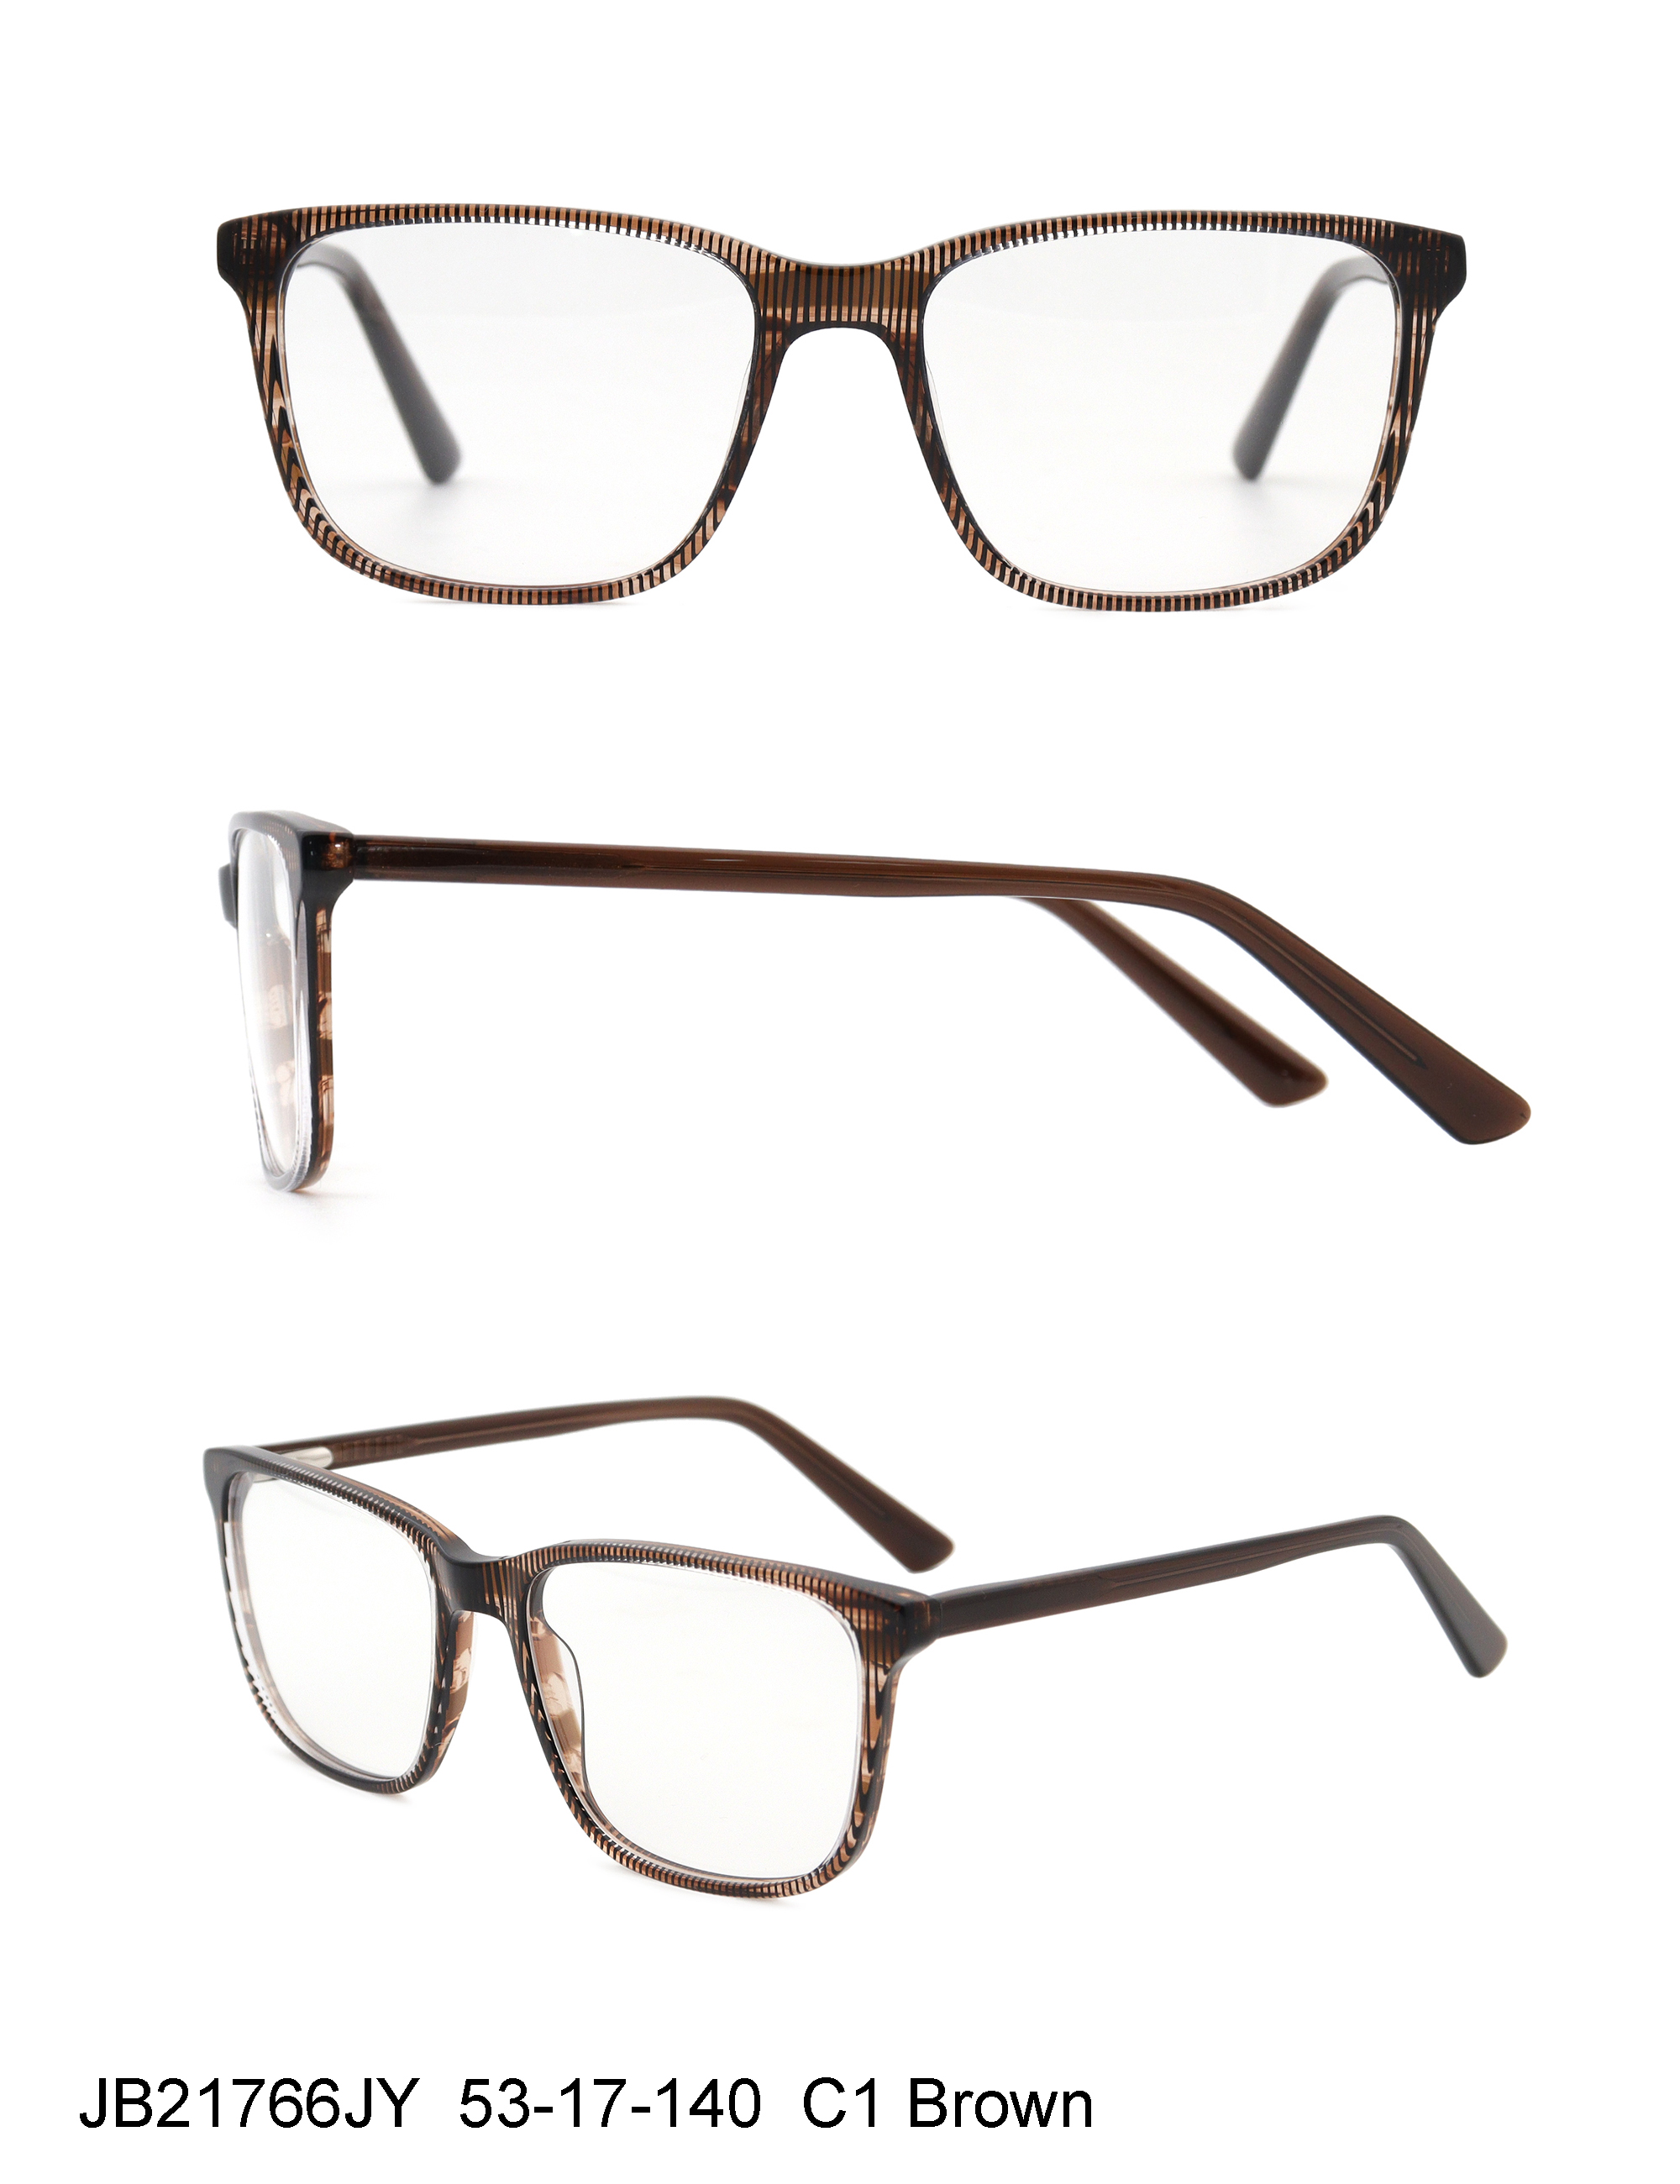 Beautifully crafted rectangle stripe shape glasses